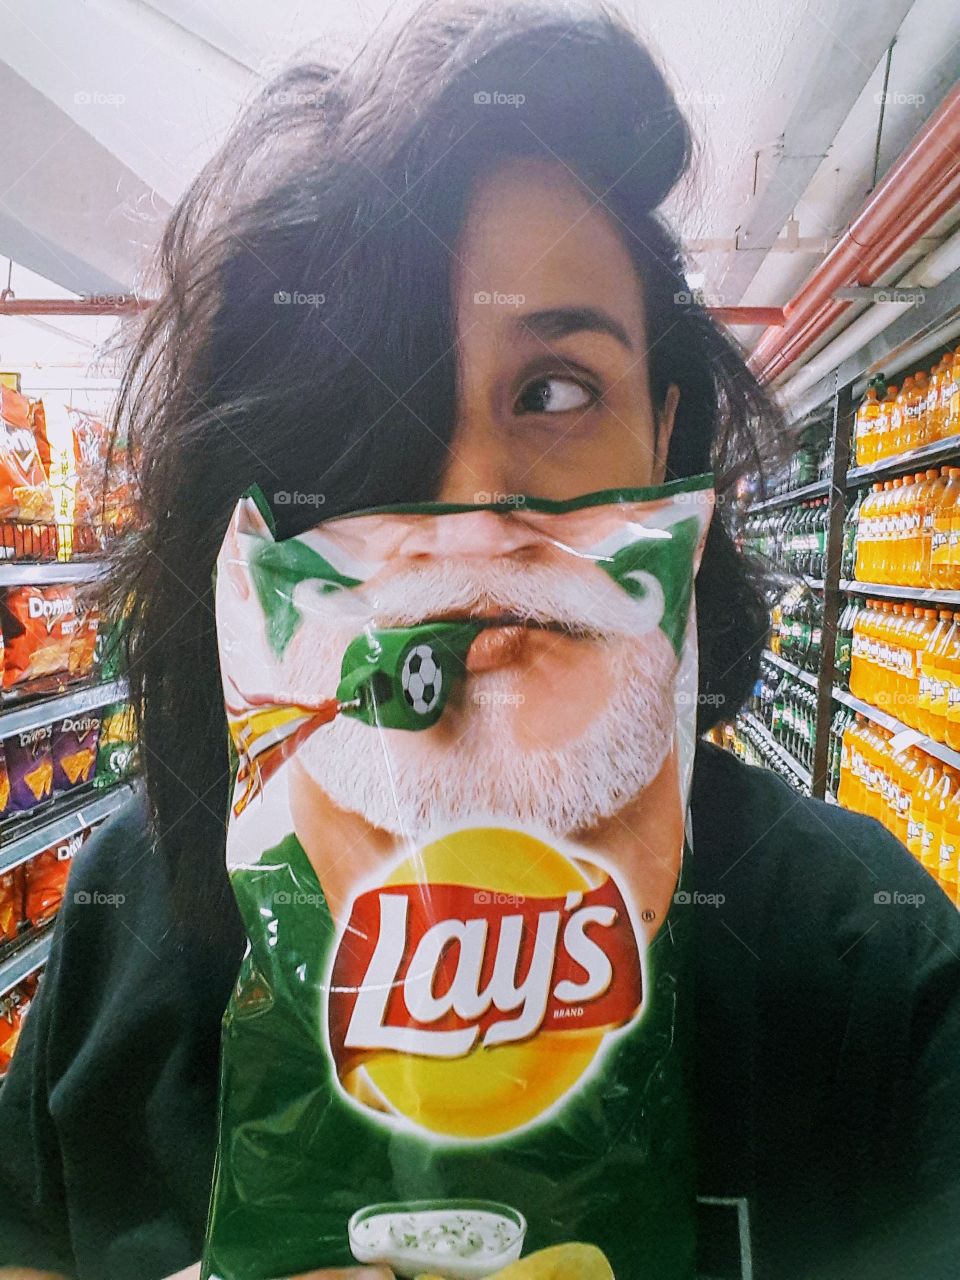 want lays? #